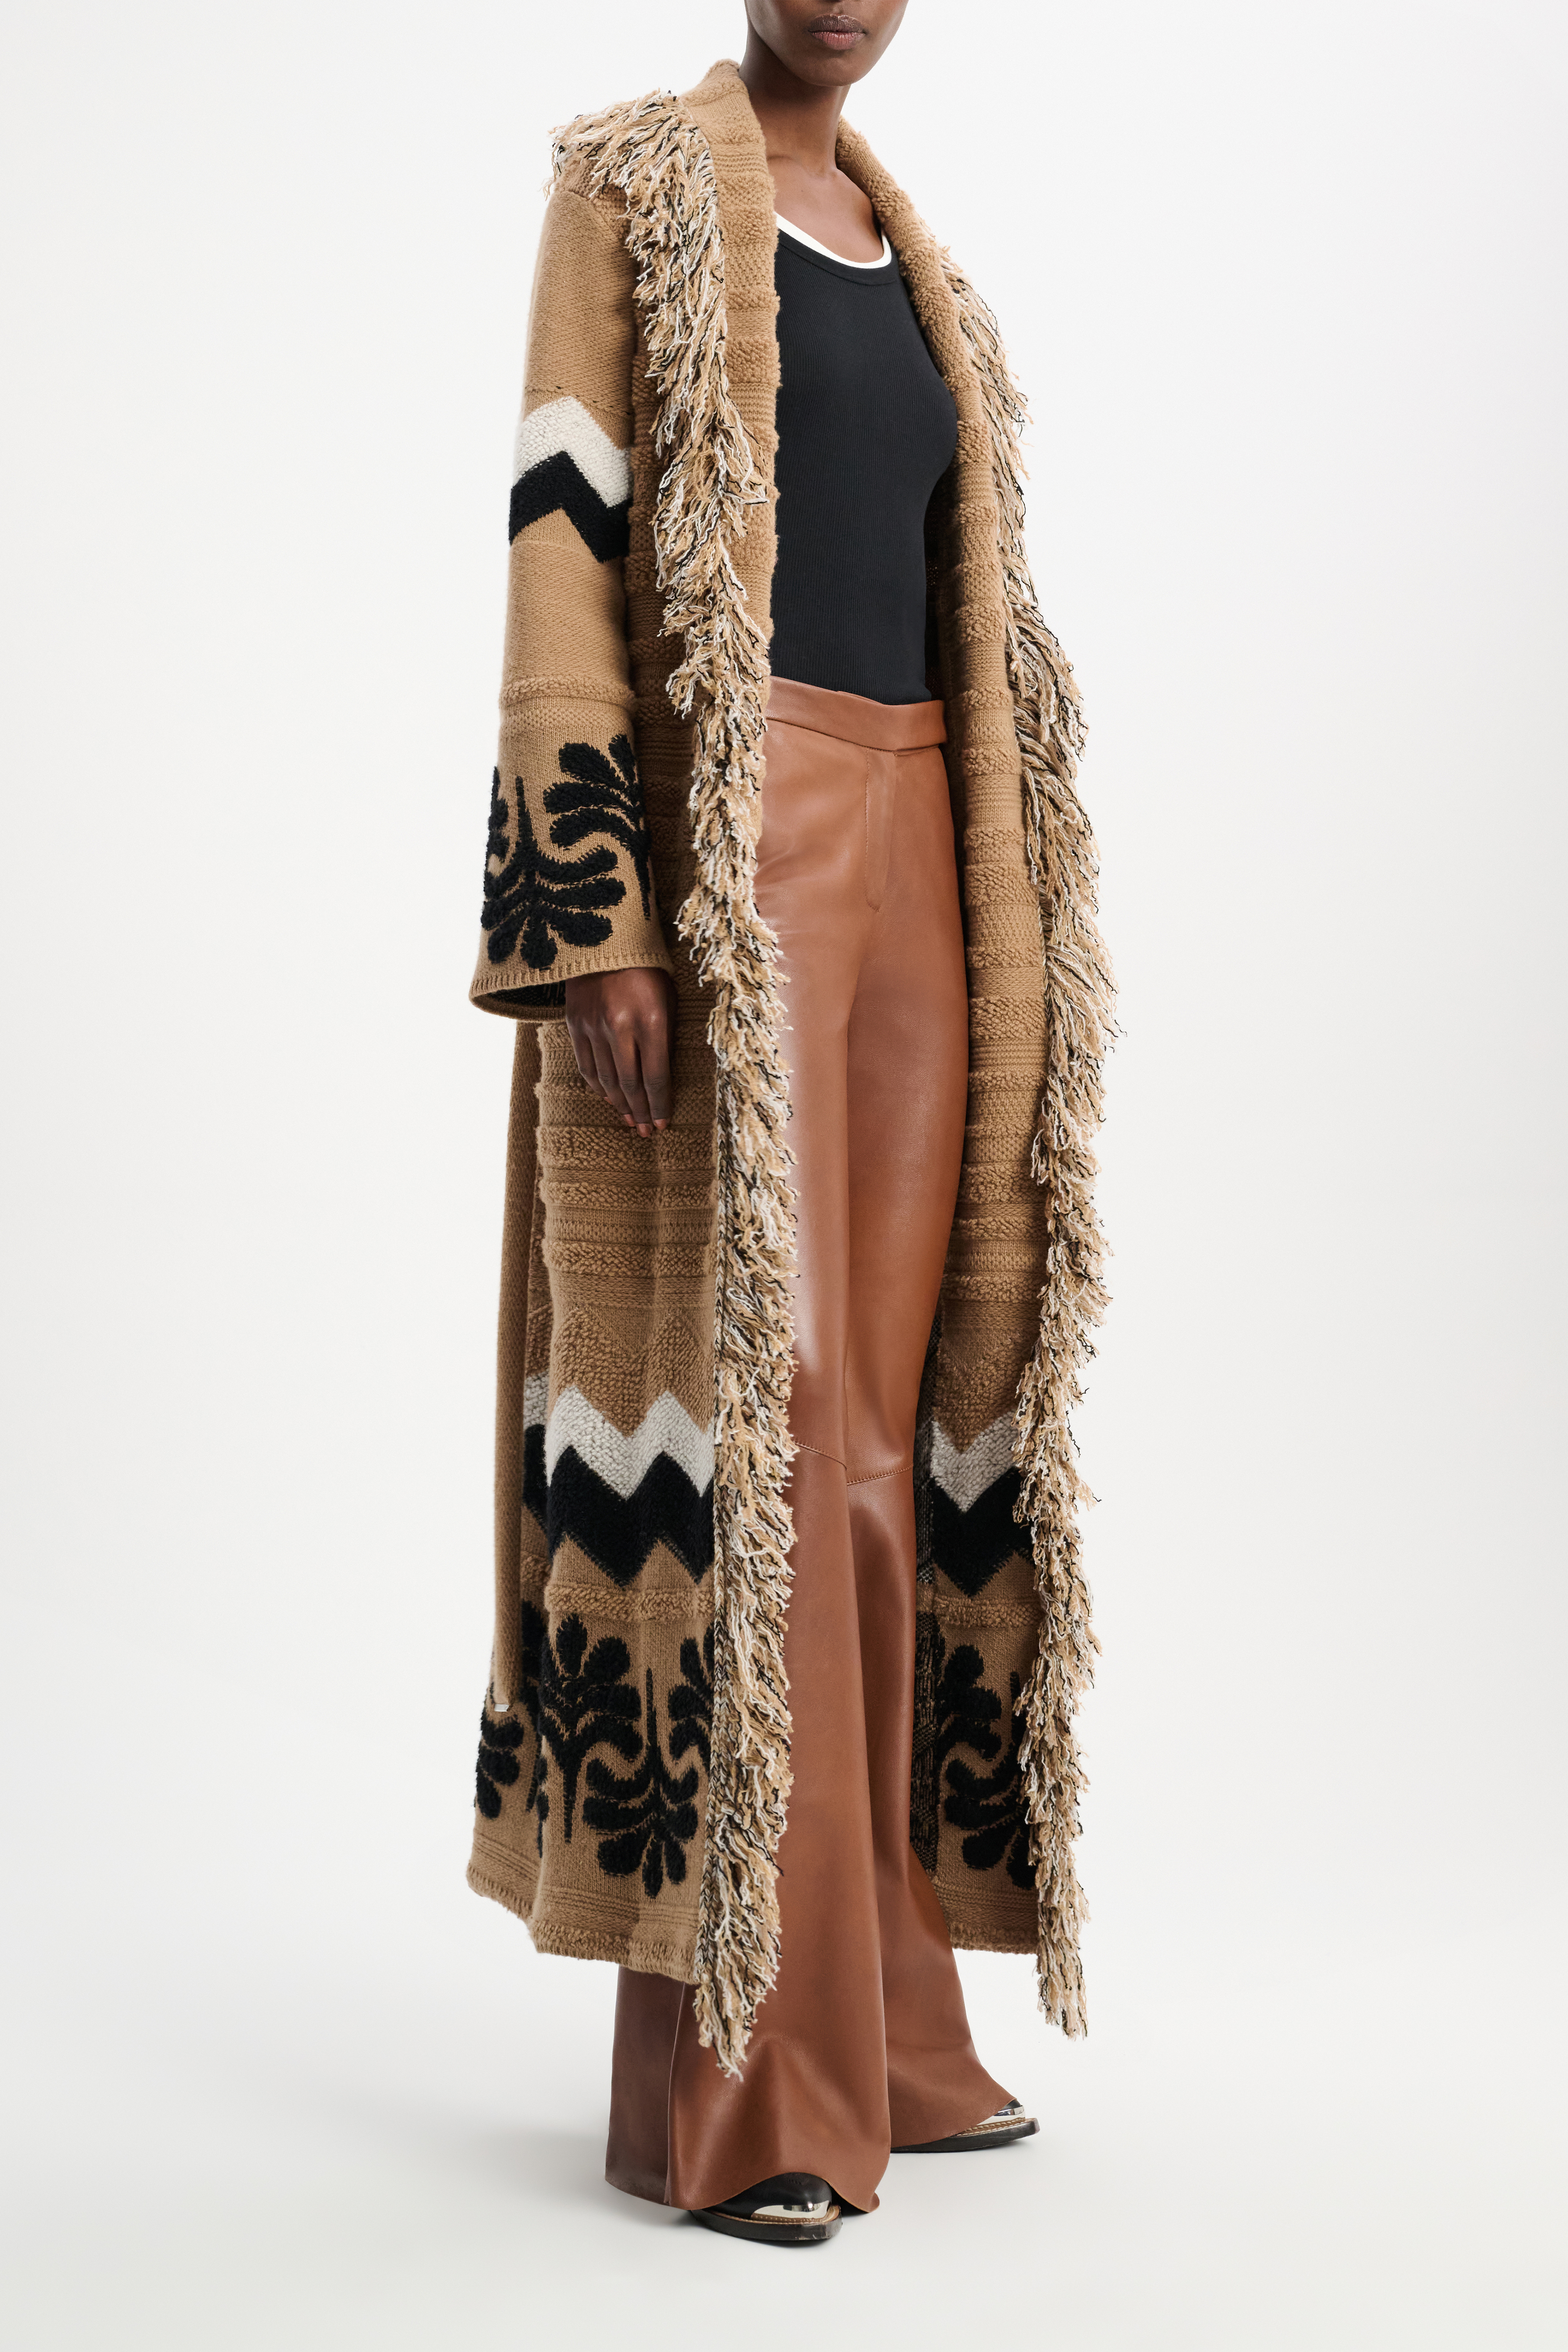 Dorothee Schumacher Jacquard knit coat with